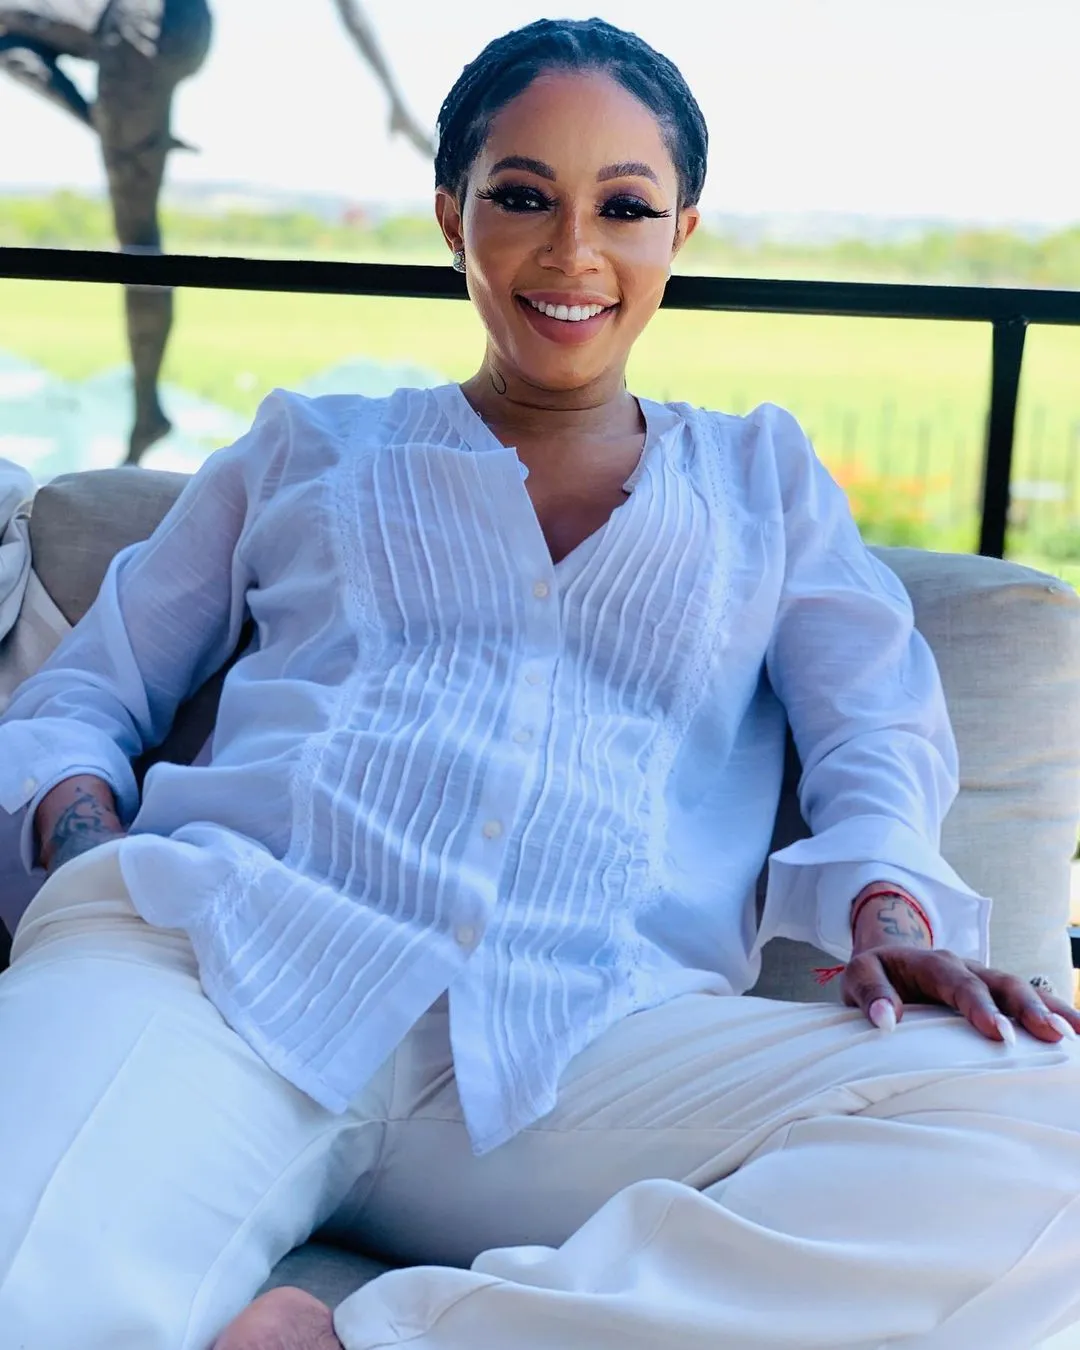 Are we still buying those tickets? – Kelly Khumalo reminds fans February 18th is just around the corner